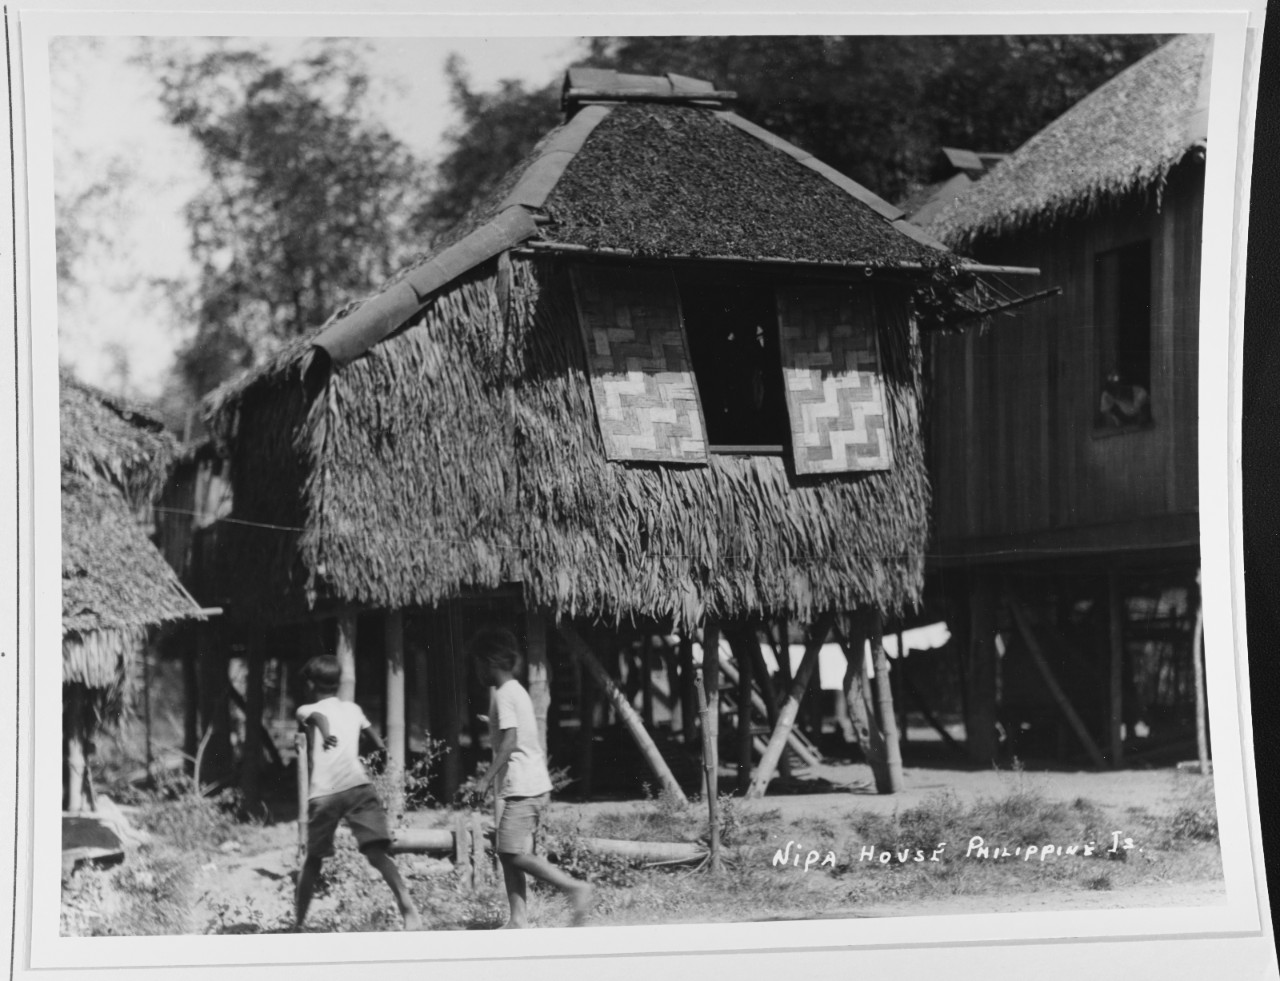 Typical dwelling found in villages in the Philippine Islands